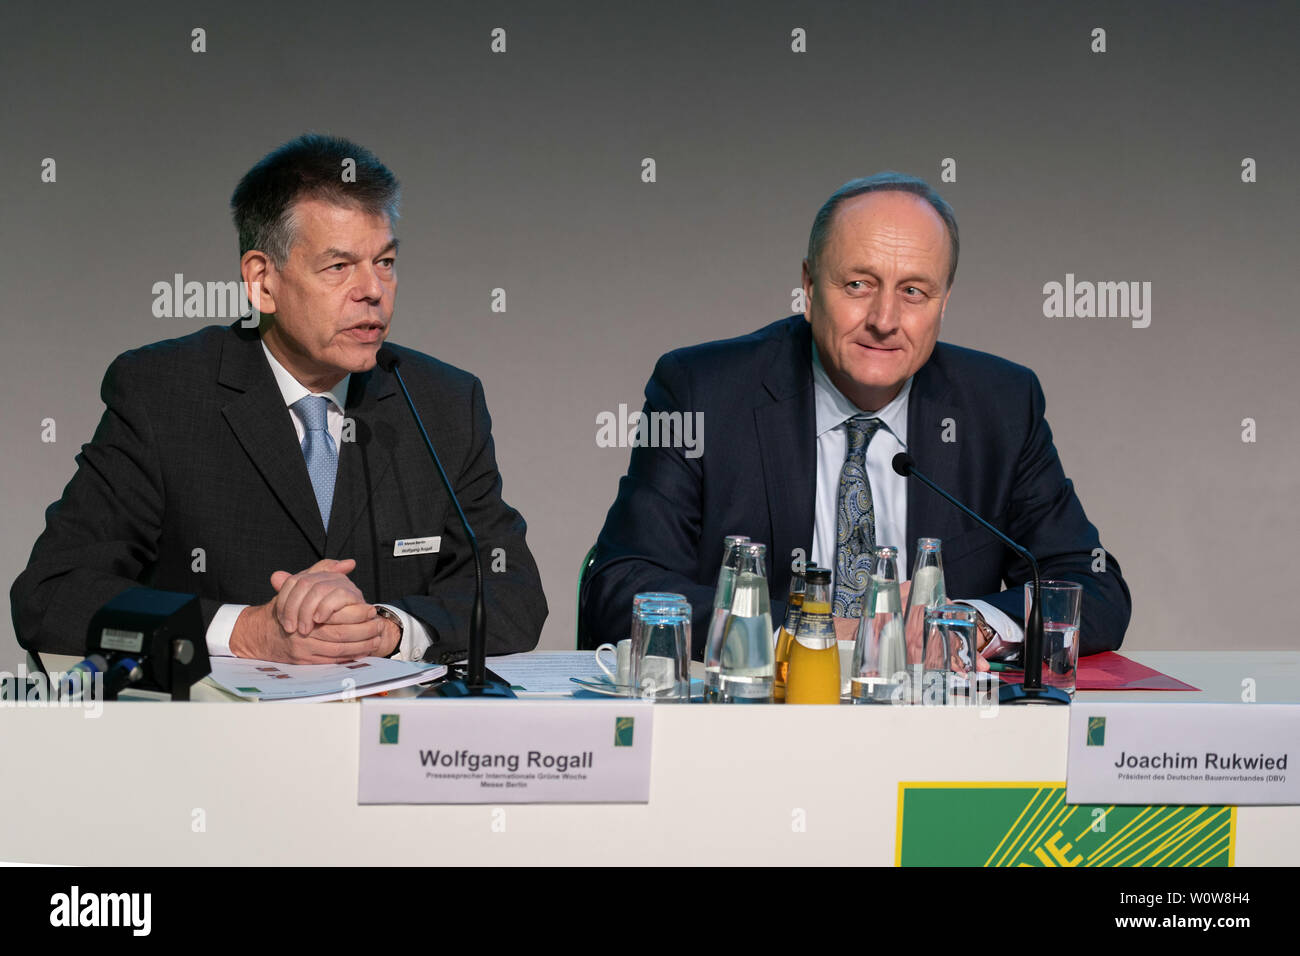 IGW 2019 - Opening Press Conference of the International Green Week Berlin 2019 - Wolfgang Rogall, Press Spokesman, International Green Week; Joachim Rukwied, President of the German Farmers' Association (v.l.n.r.) Stock Photo